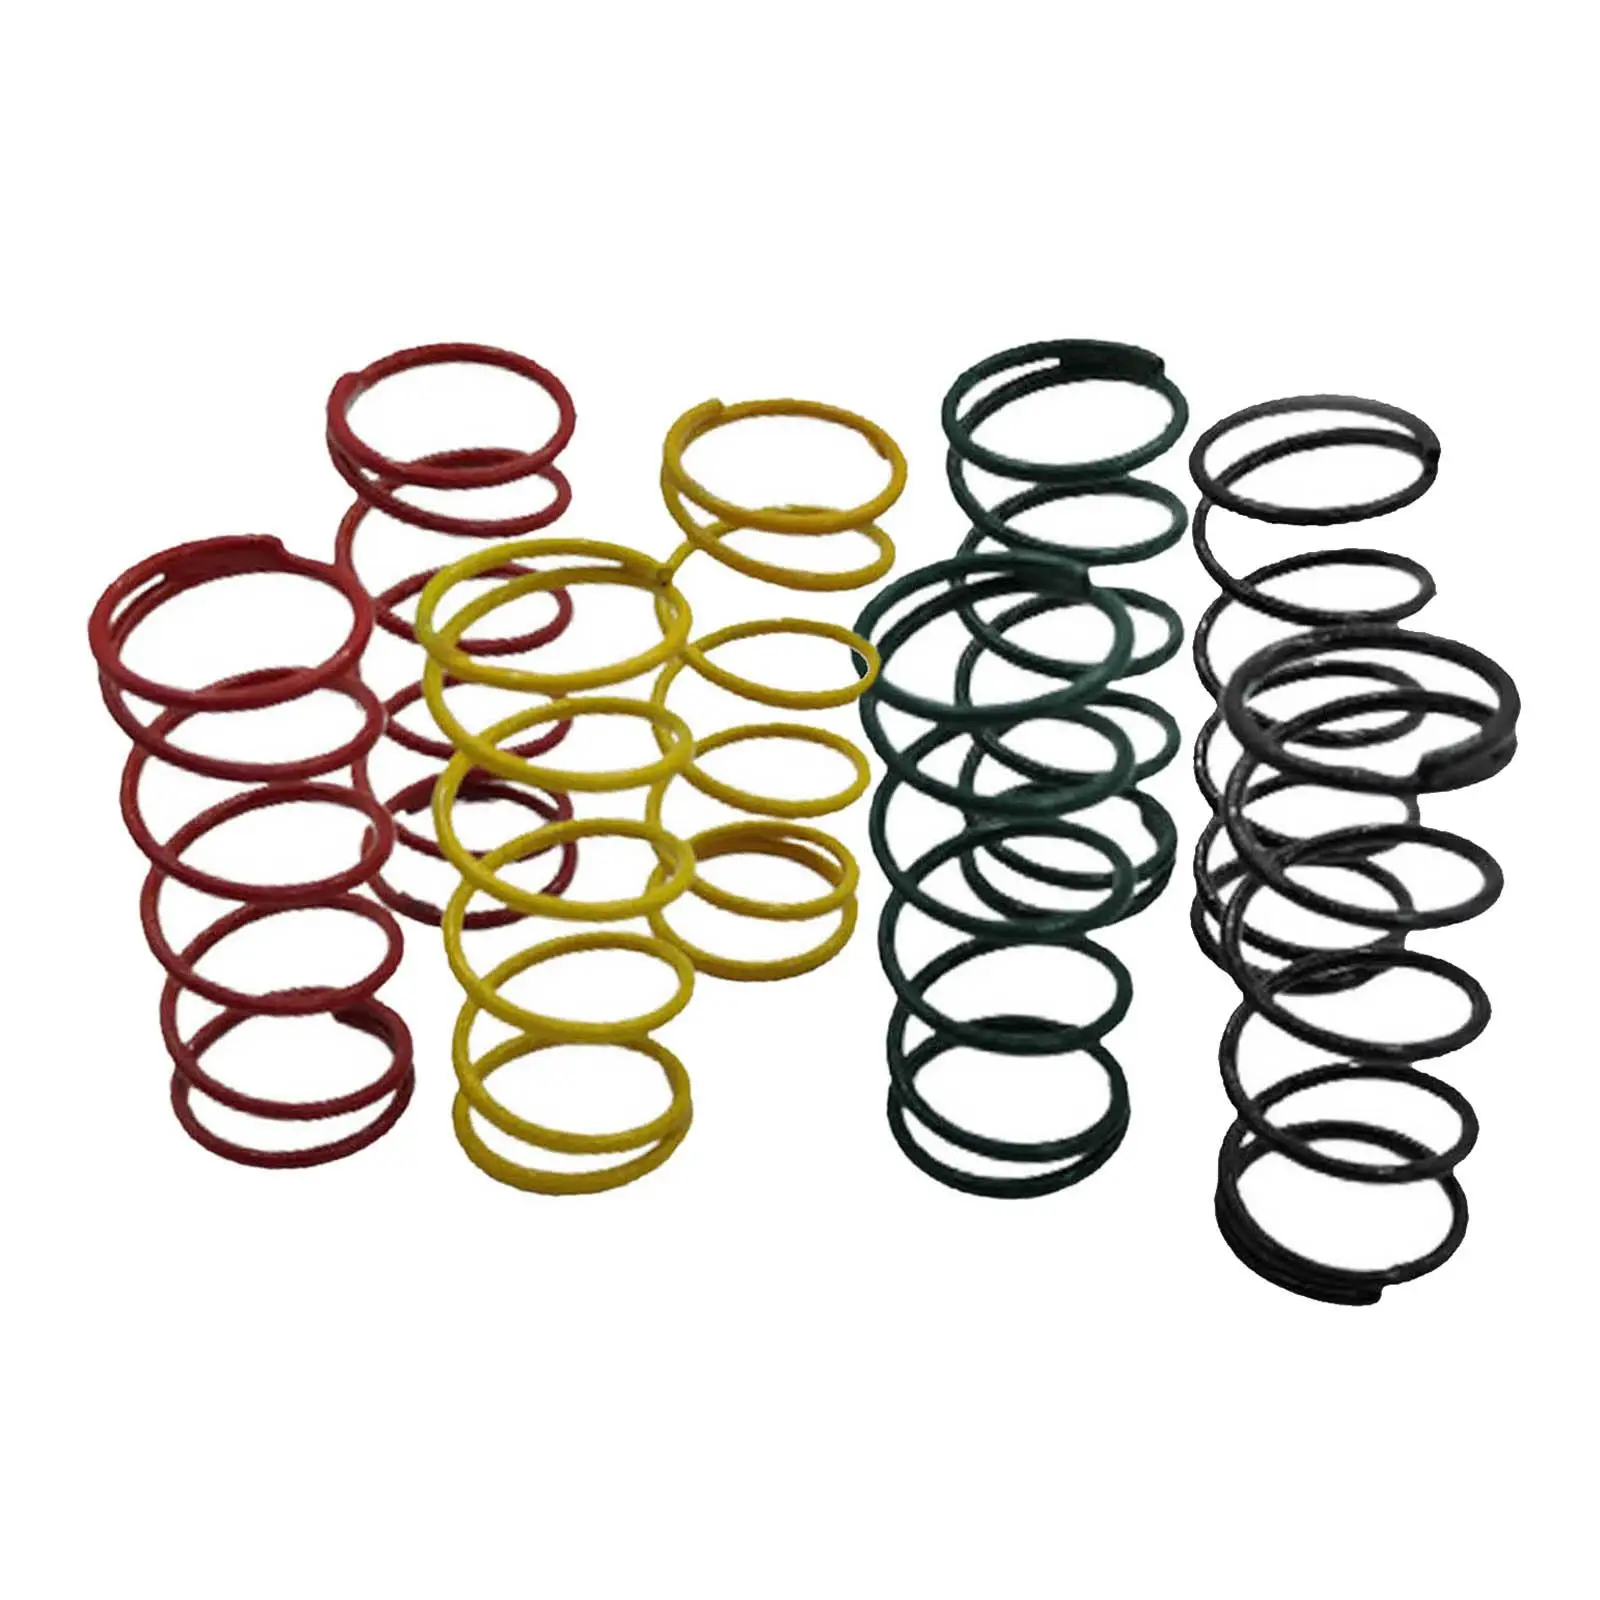 8x Big Bore Shock Spring Set 80mm Iron Extension Spring for RC Vehicles for Traxxas Truck